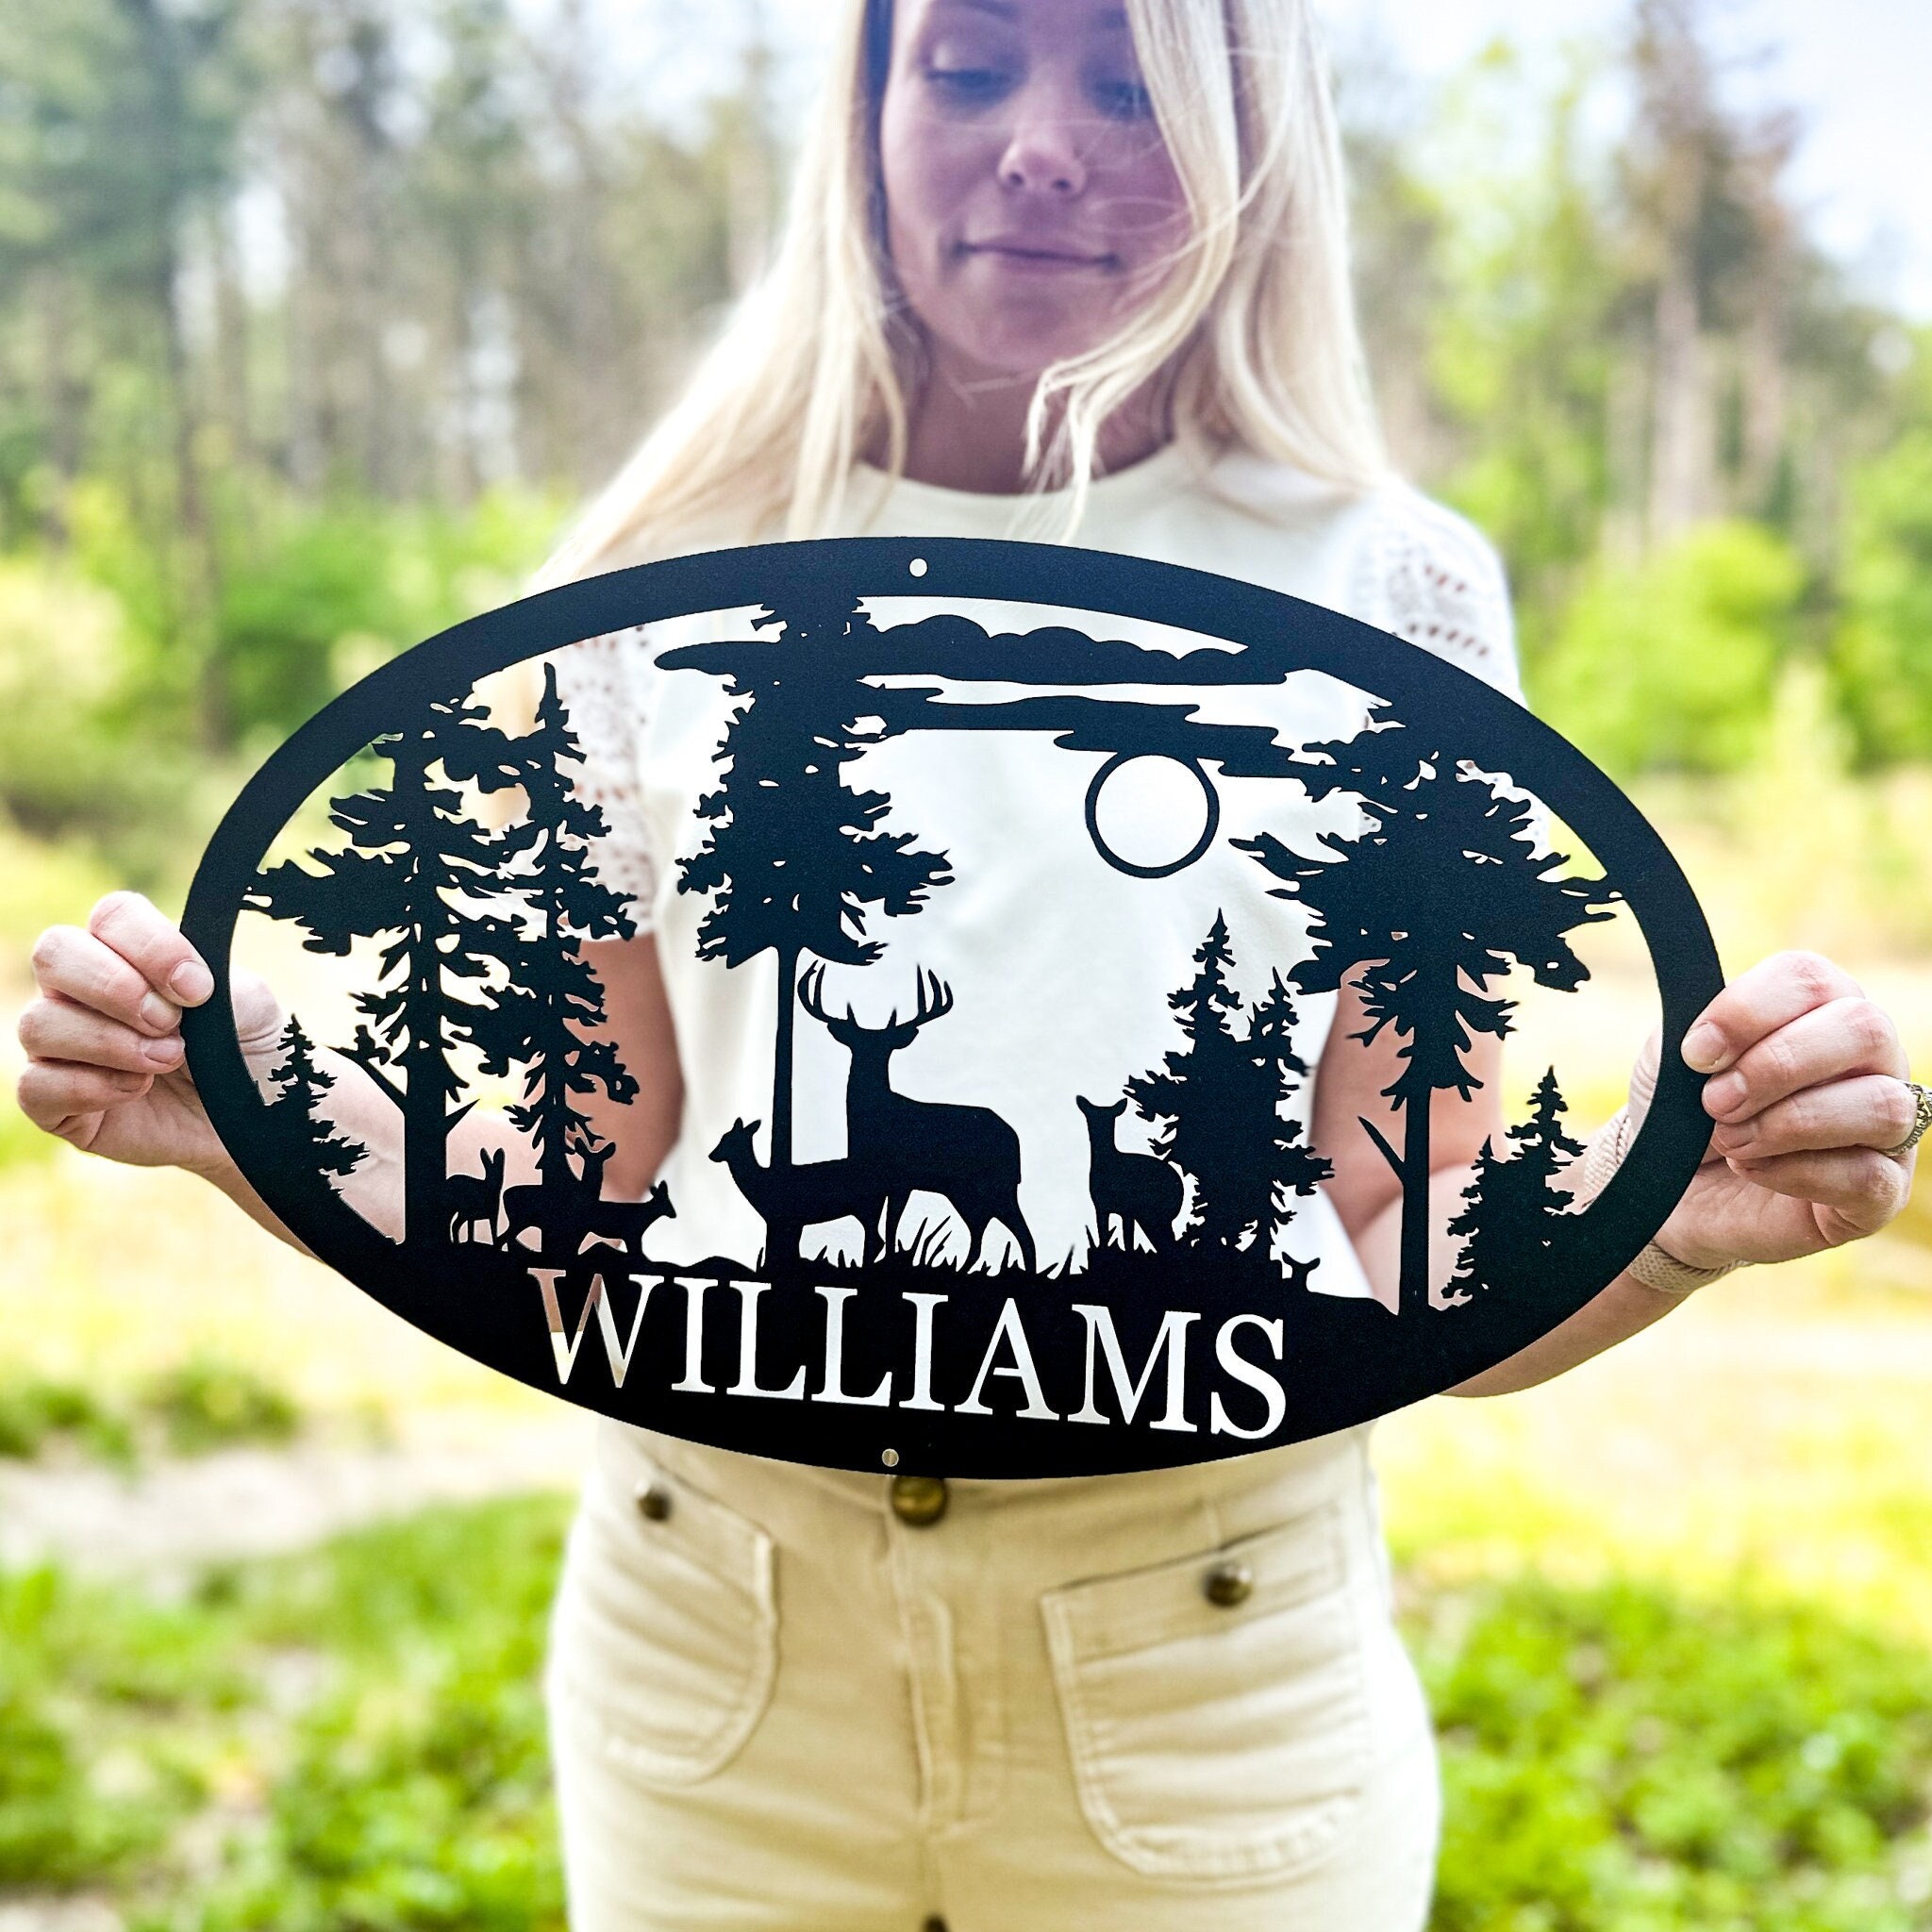 Custom Hunting and Fishing Camp Sign - Log Cabin Decor - Black Forest Decor